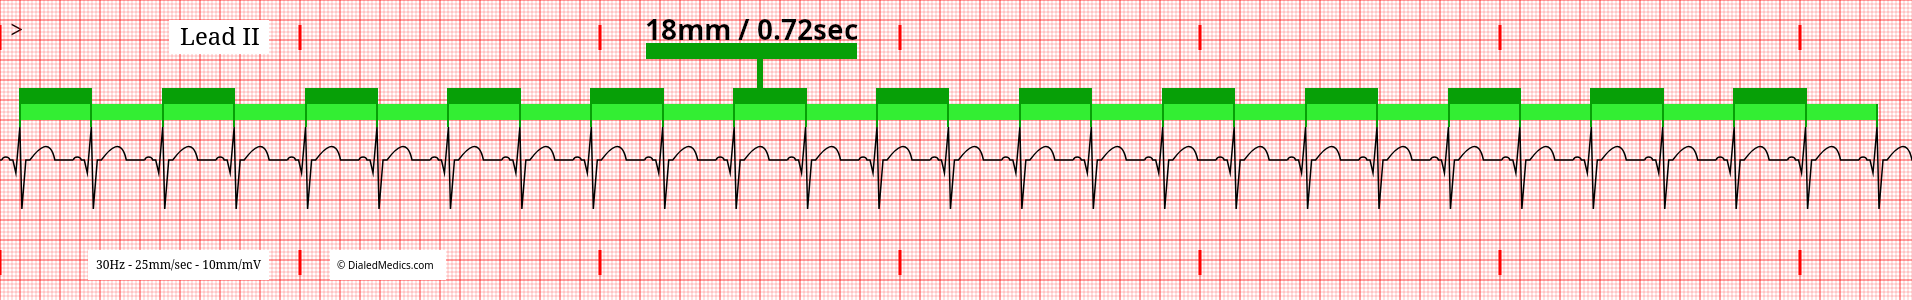 Software generated EKG tracing of a Normal Sinus Rhythm at 84bpm with R-R Interval of 18mm / 0.72sec marked.